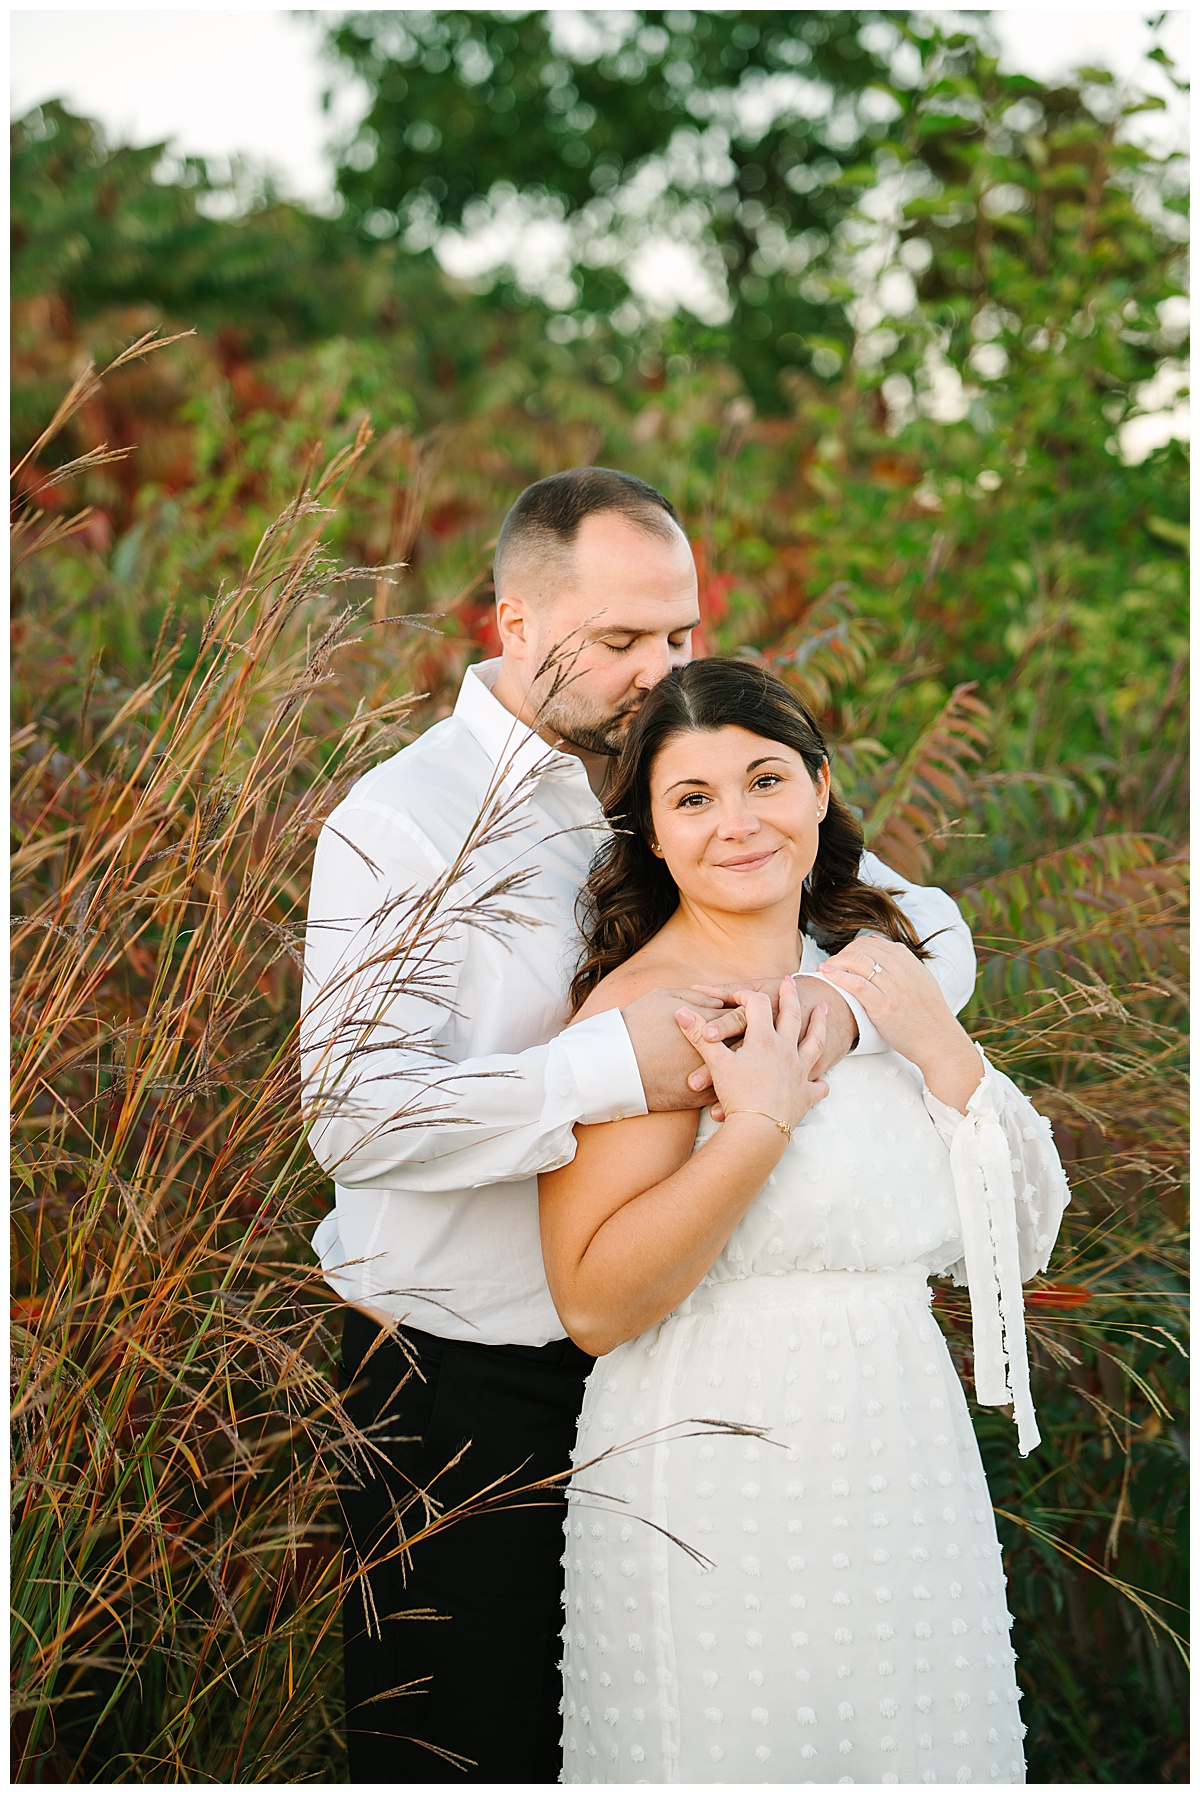 Man kisses woman in front of field for Michigan Wedding Photographer